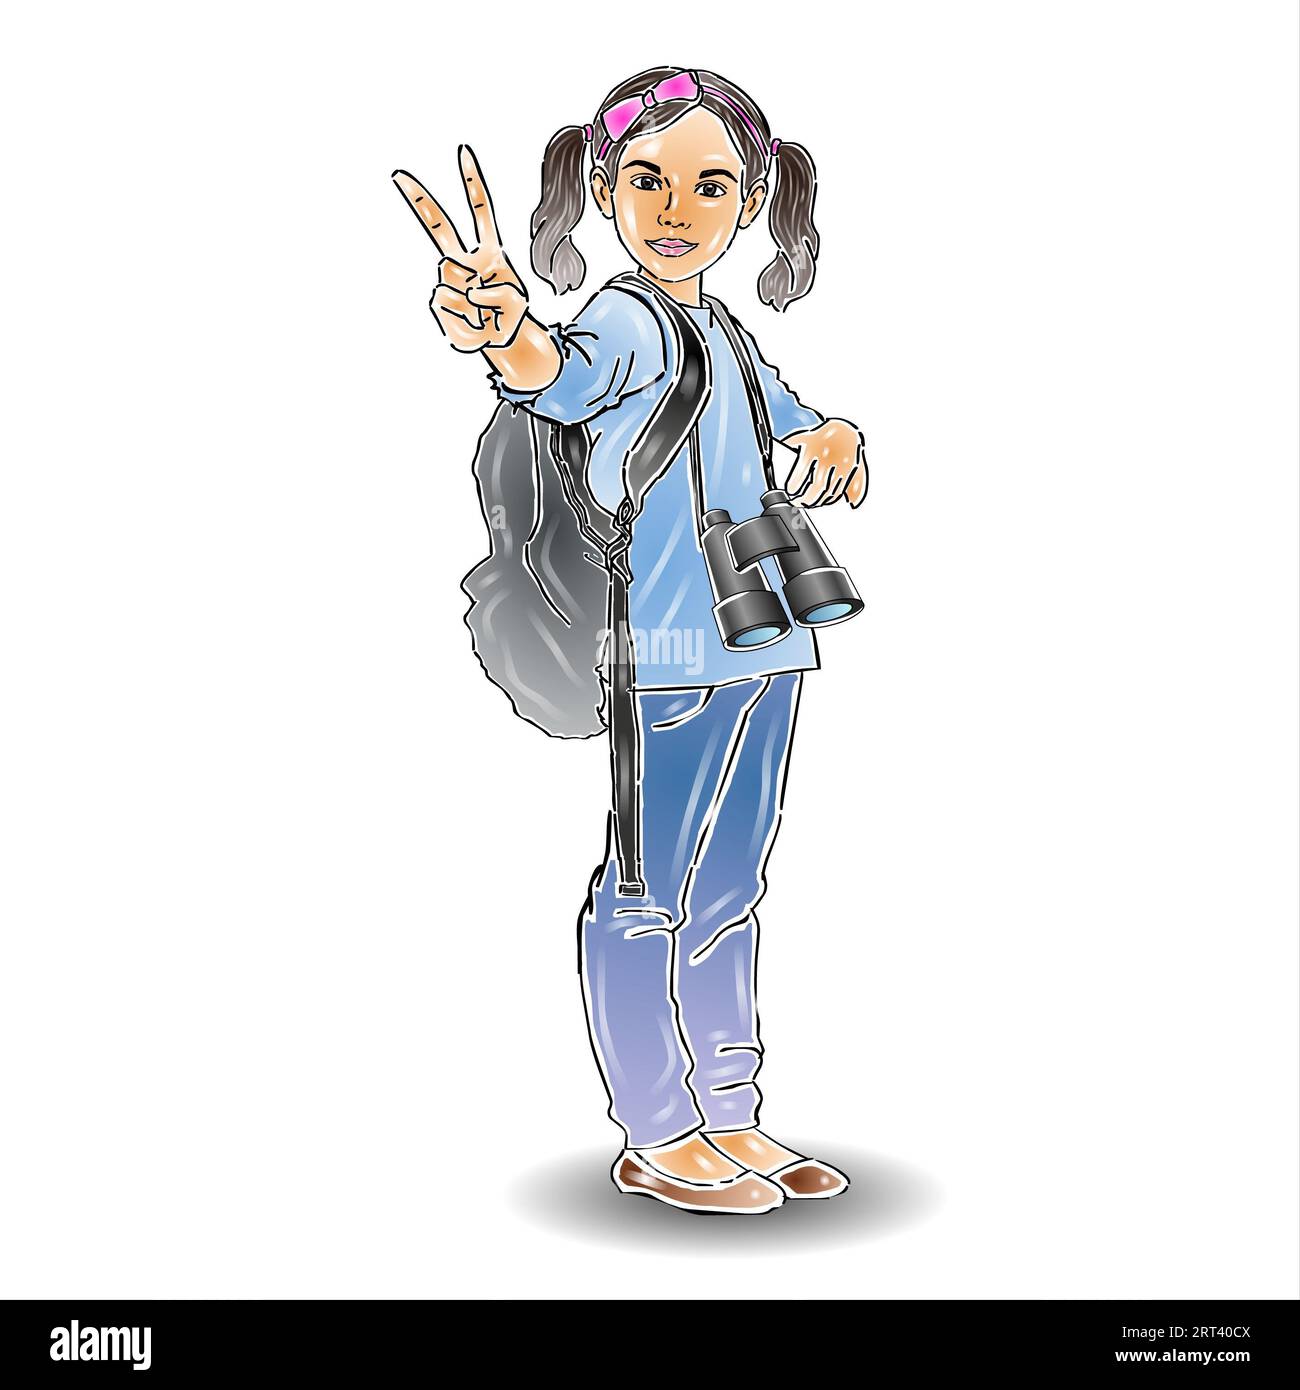 Girl tourist with a backpack and binoculars. Vector illustration. Stock Photo